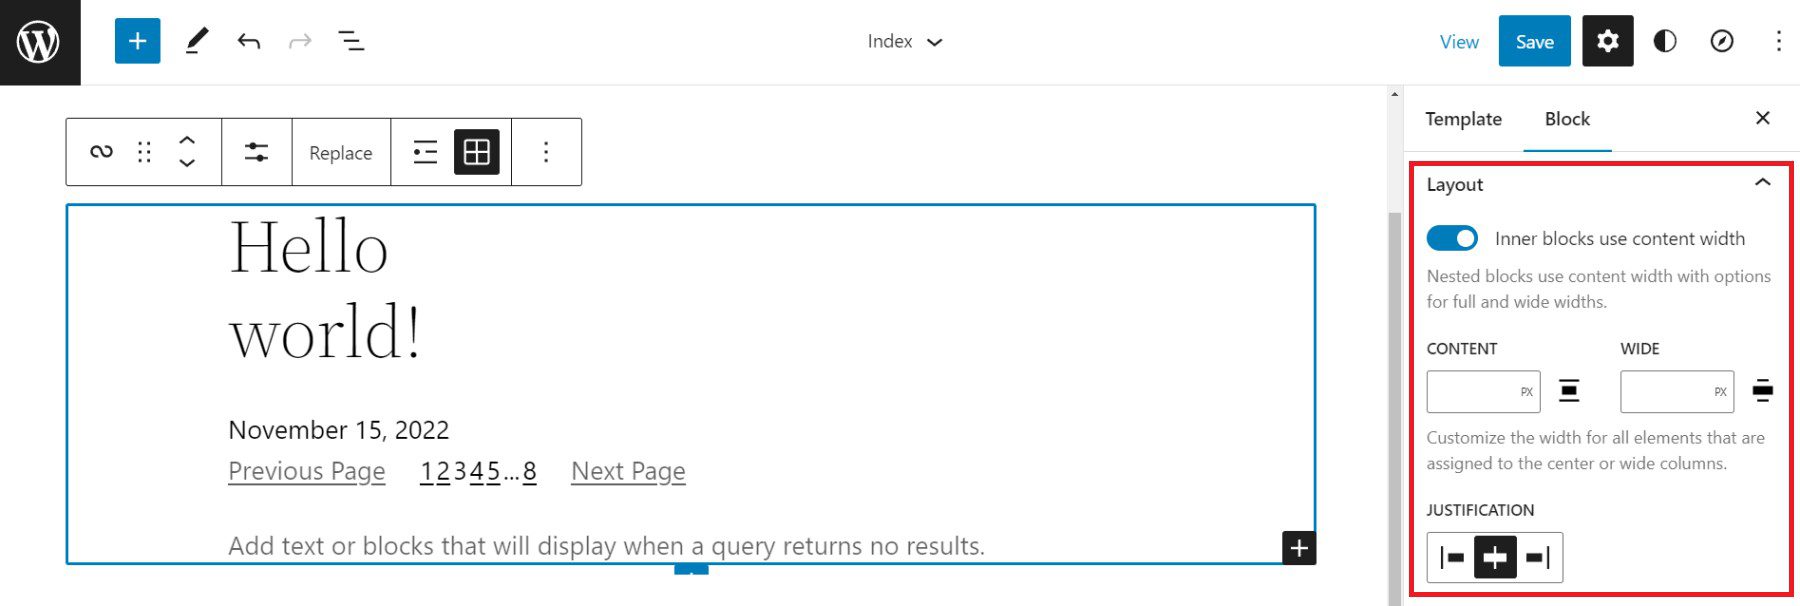 Query Loop Sidebar Settings - Layout Nested Content Width